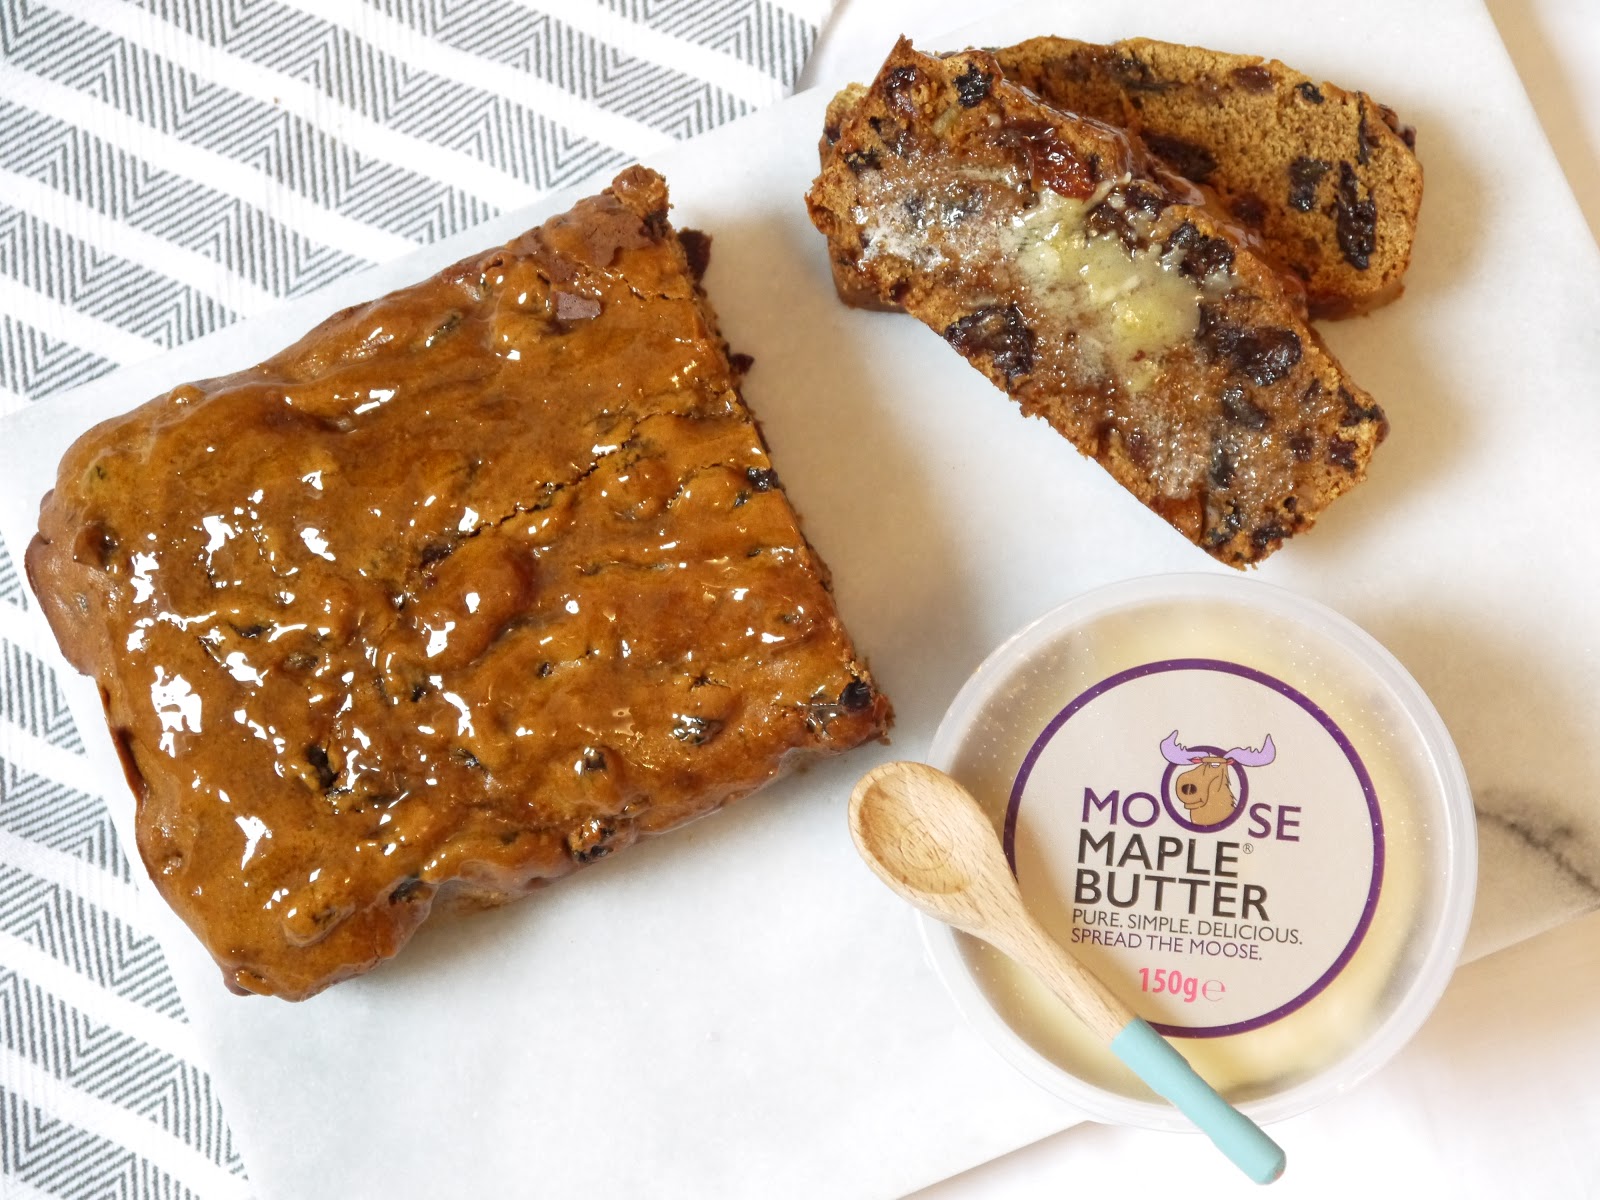 Moose Maple Butter The Betty Stamp Recipe Malt Loaf